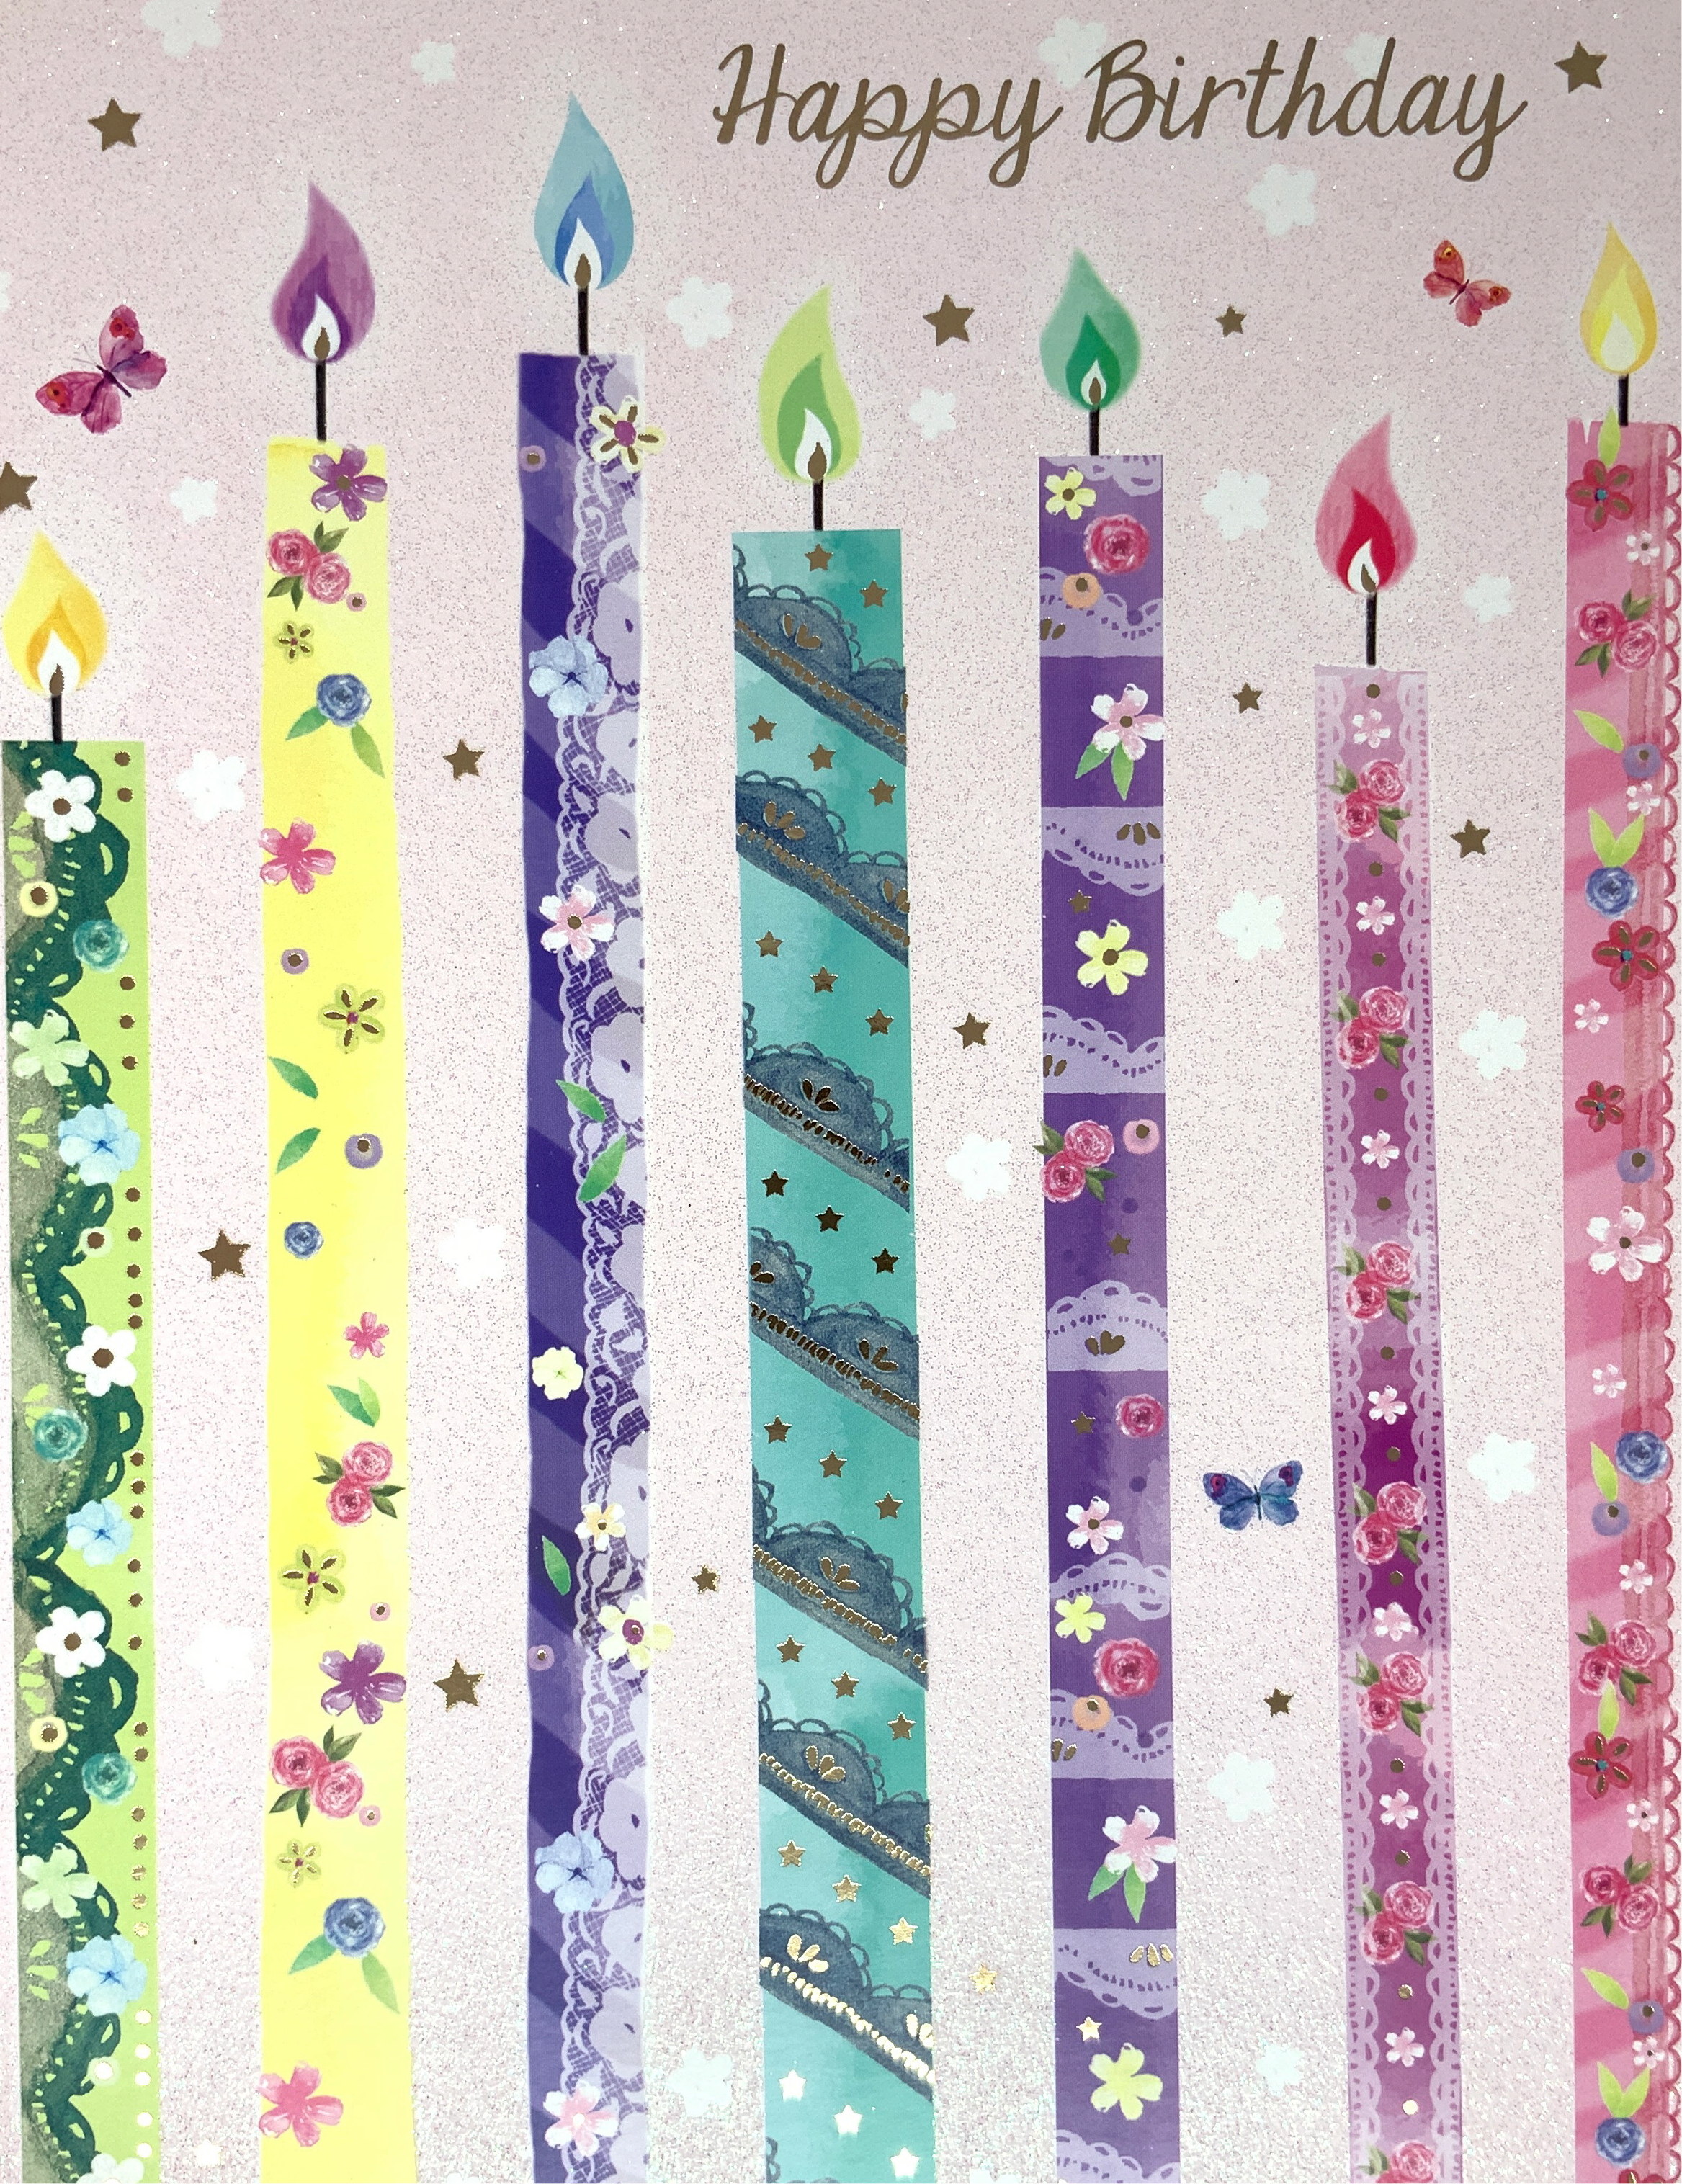 Birthday Card - Candles & A Shining Background With Glitter ( Large Card )